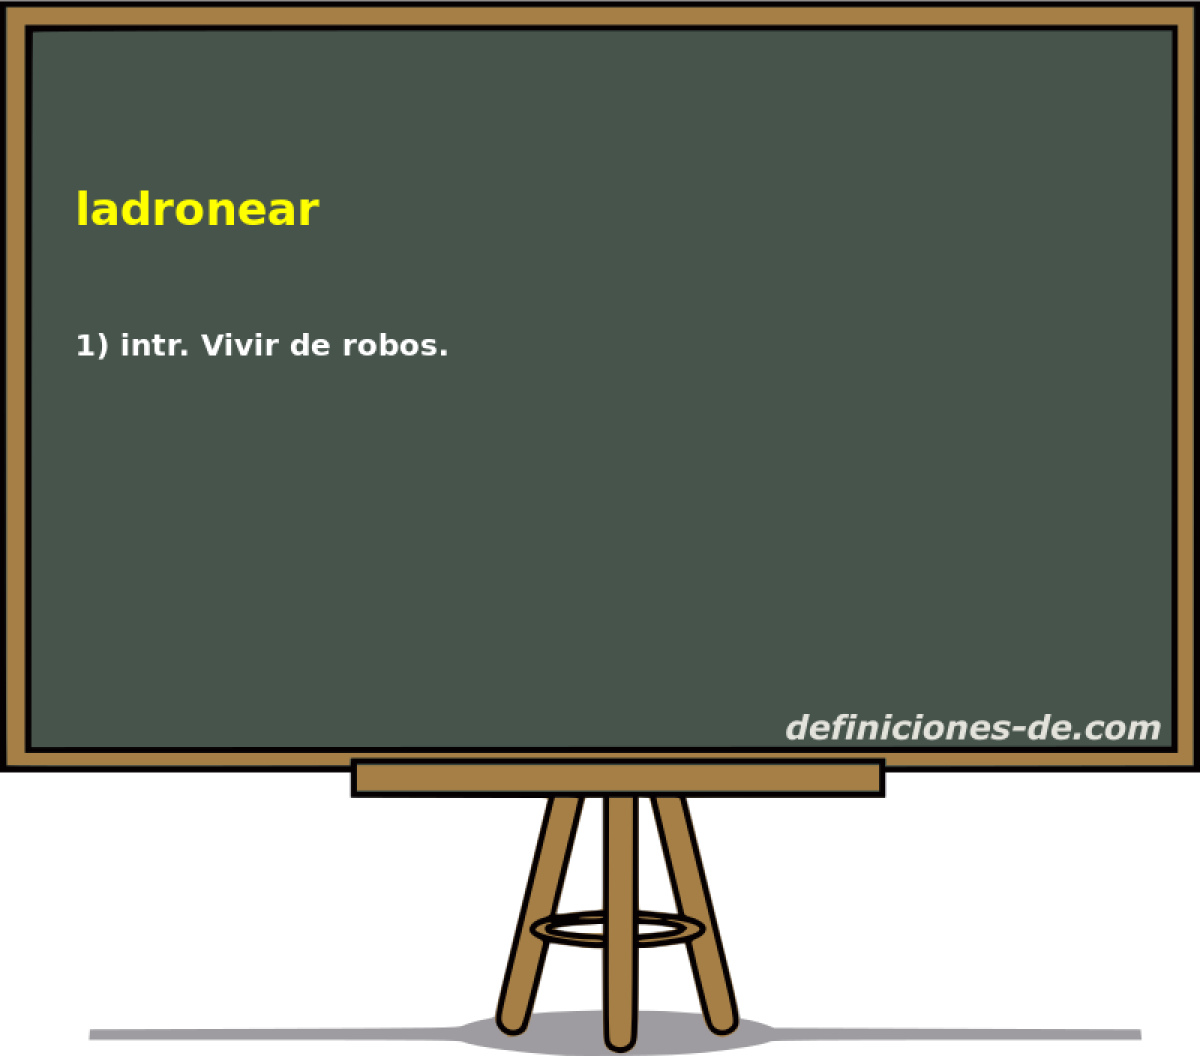 ladronear 